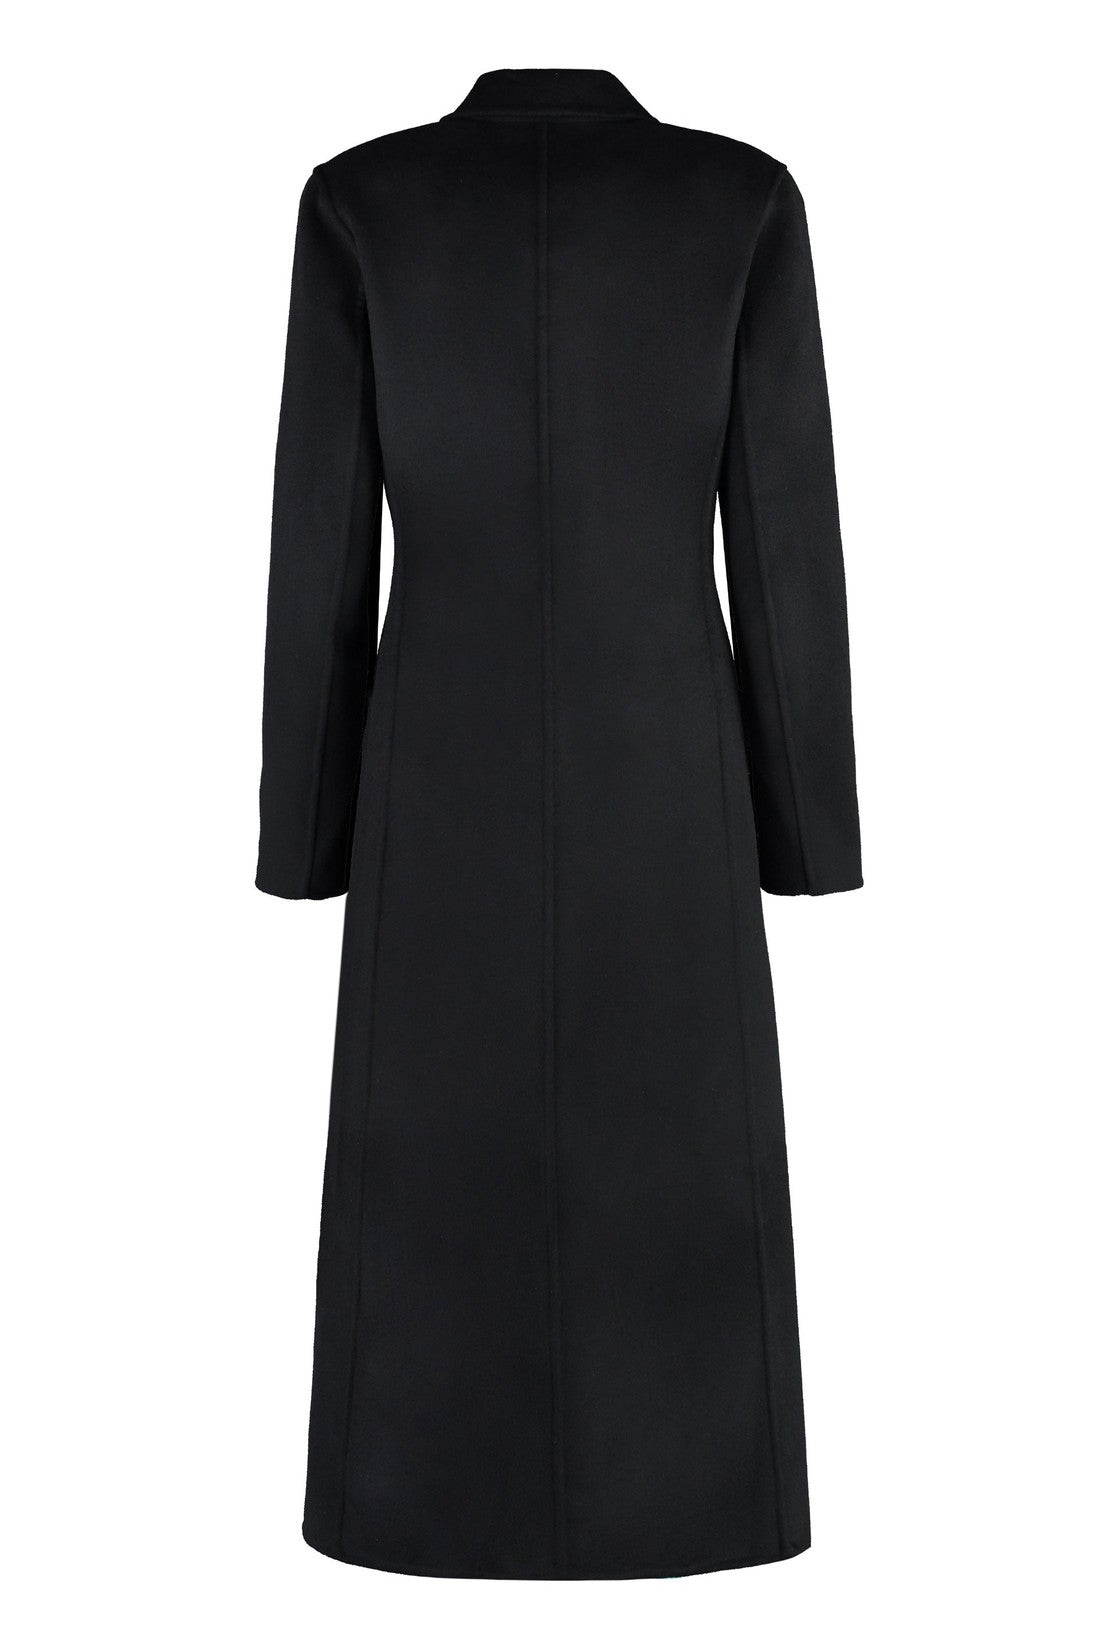 Tory Burch-OUTLET-SALE-Single-breasted wool coat-ARCHIVIST